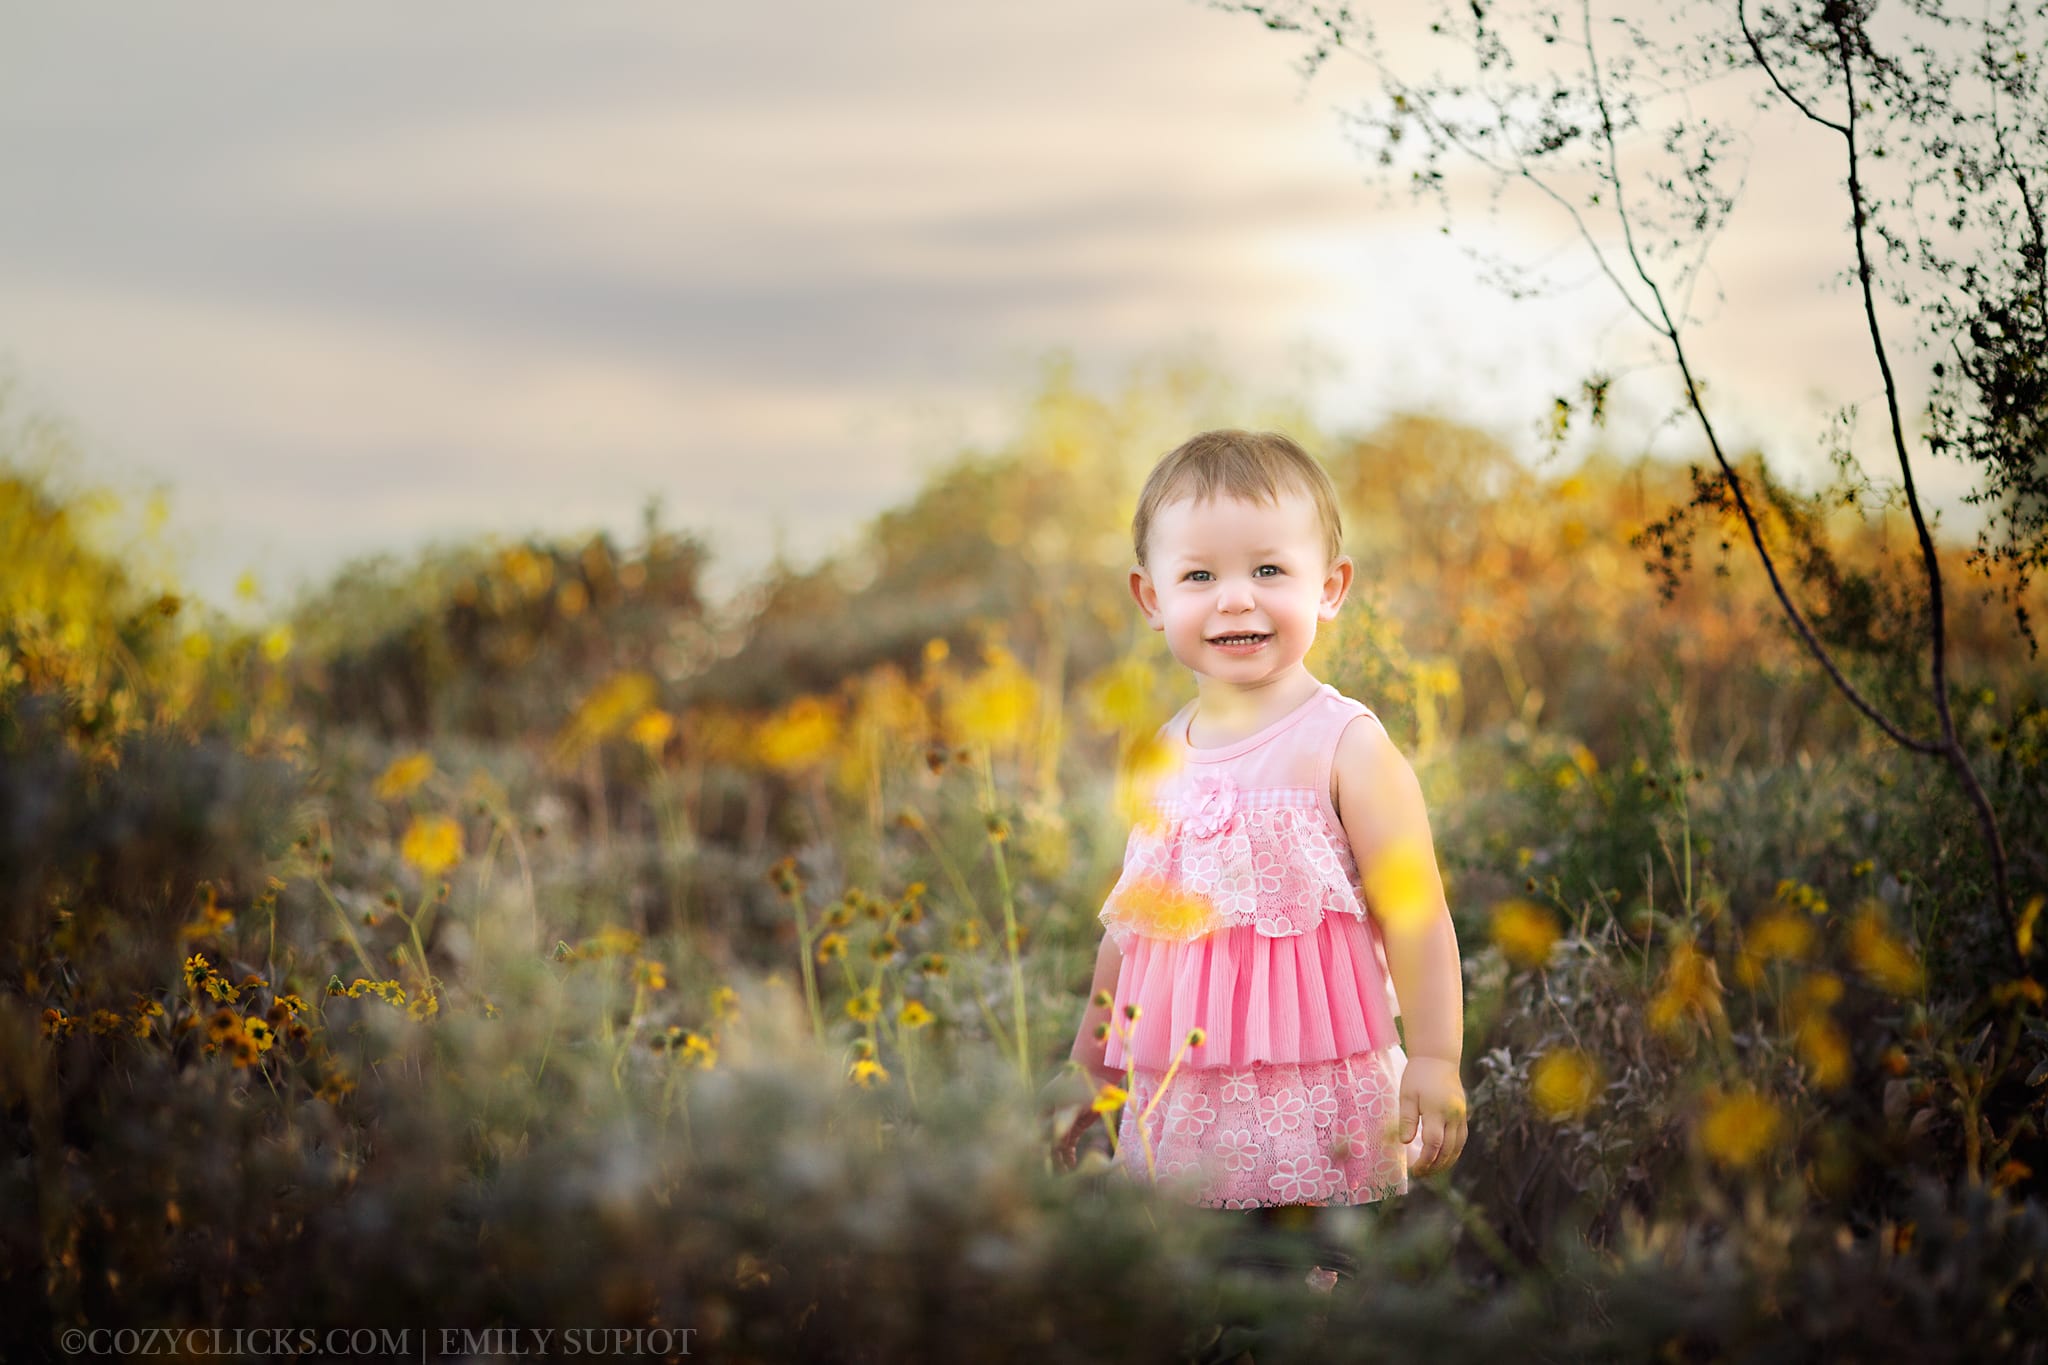 Toddler girl photo standing in a field of flowers with he sun setting behind her